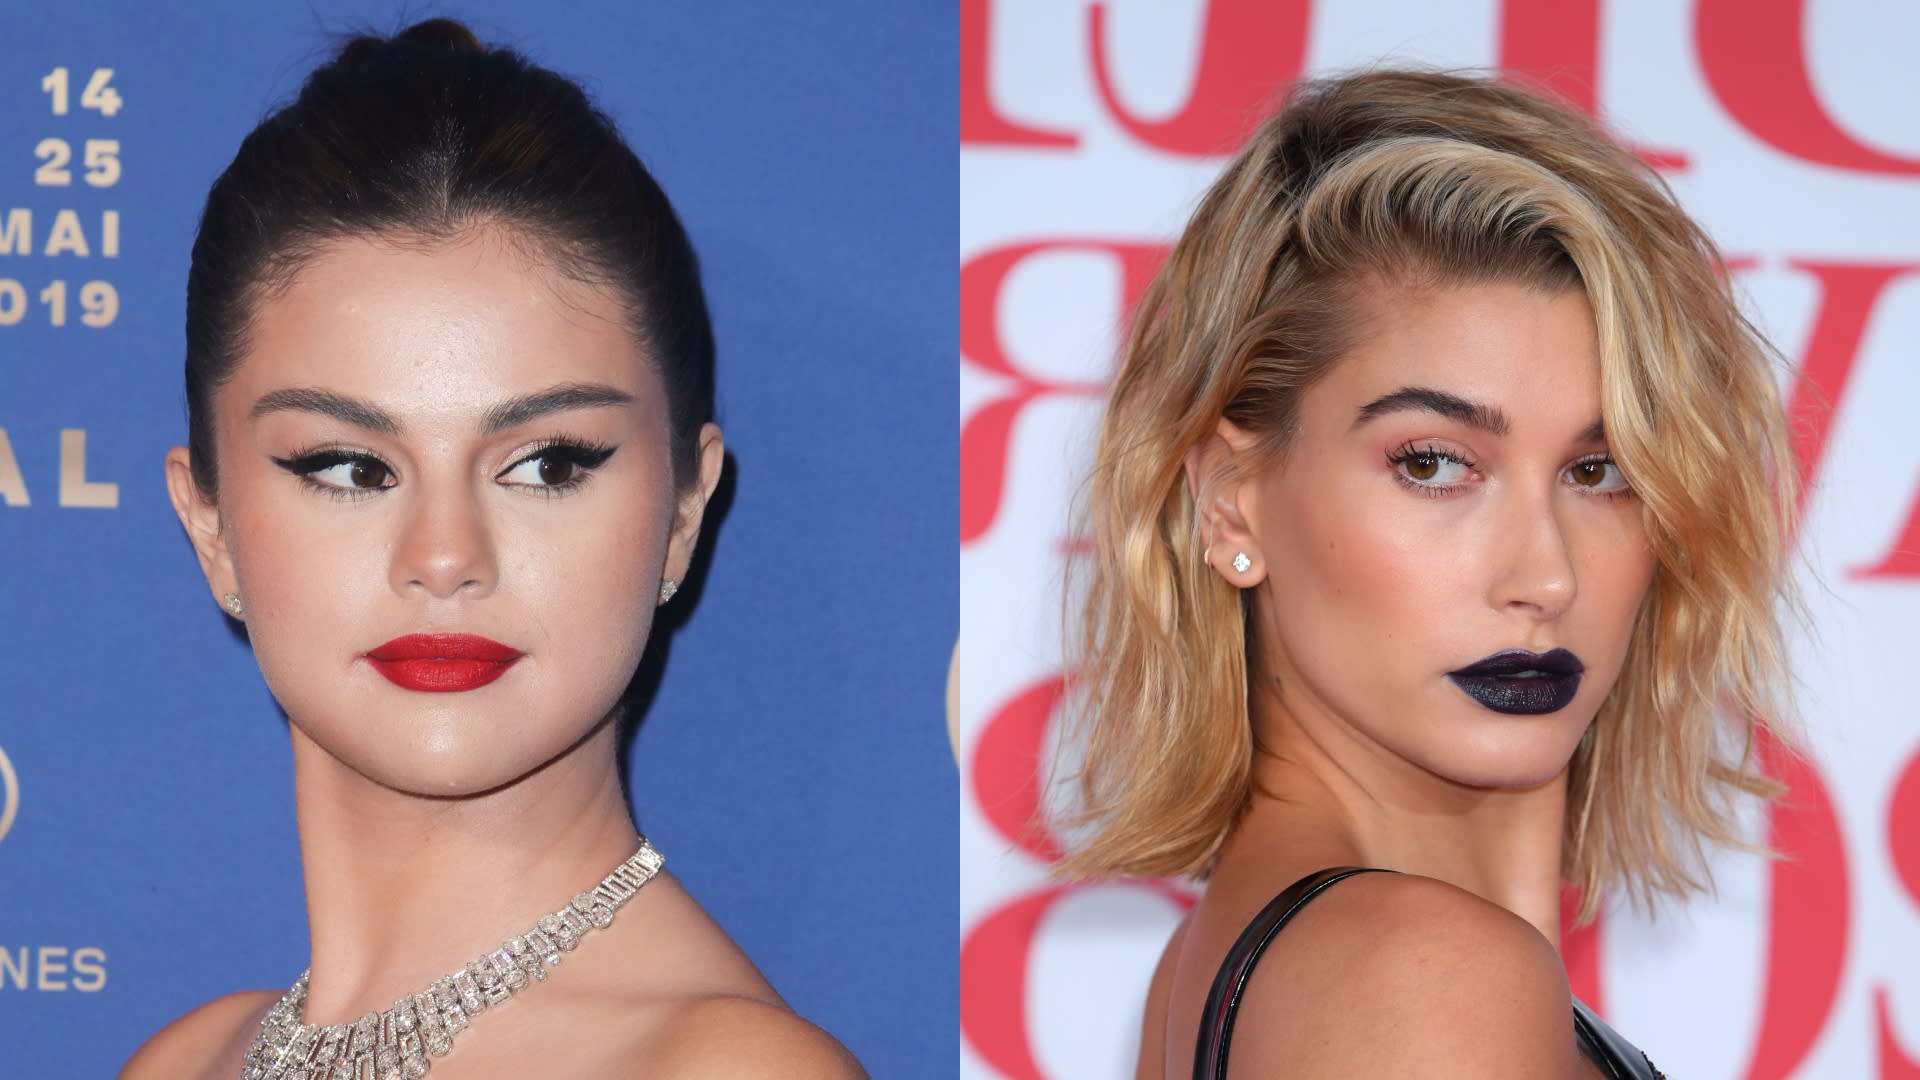 The Selena Gomez and Hailey Bieber Drama Proves We're Still Obsessed